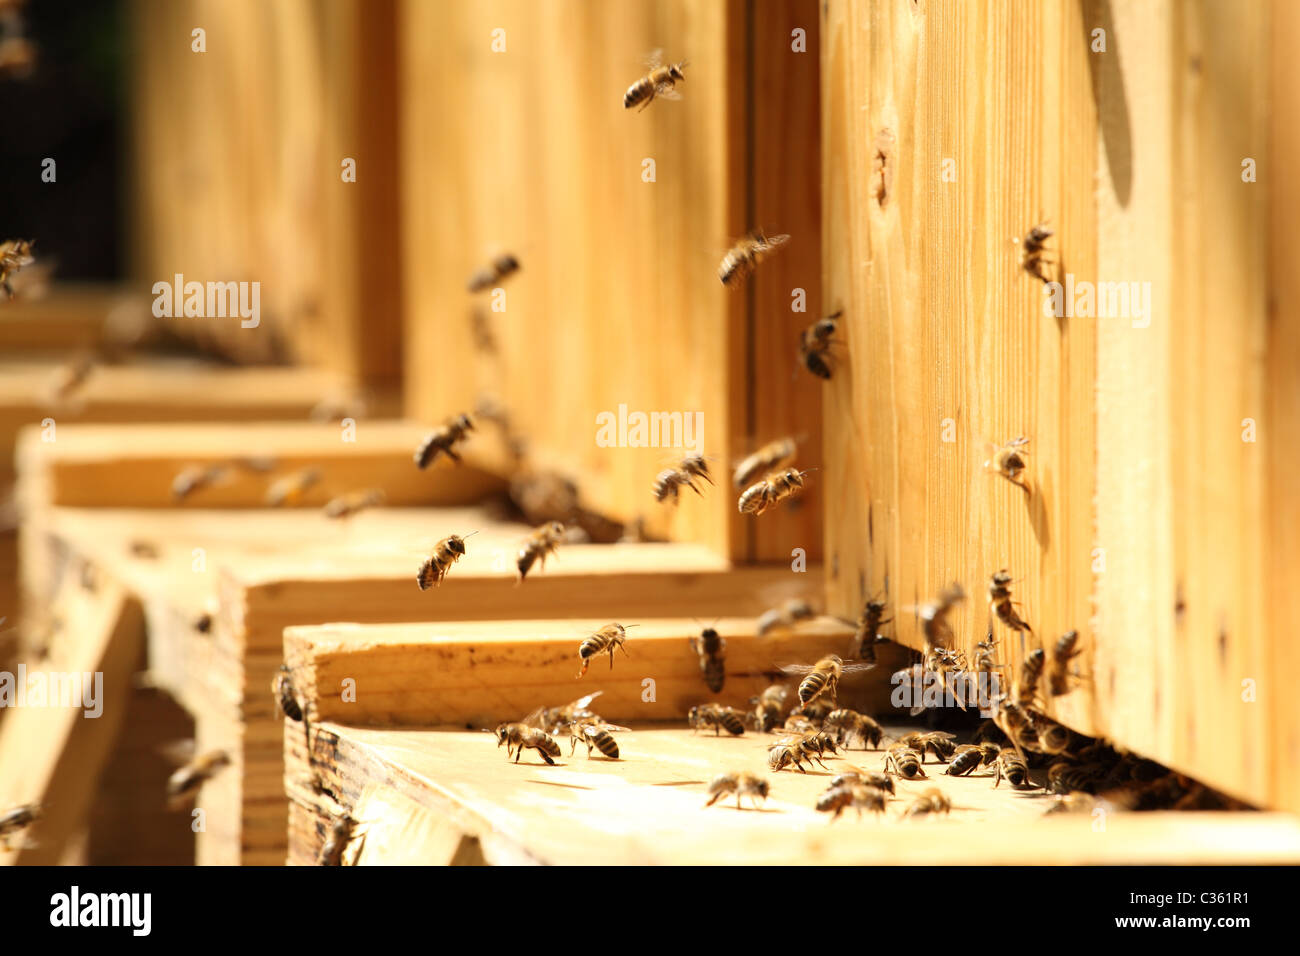 Western honey bees flying near the entrance of the hives. Stock Photo